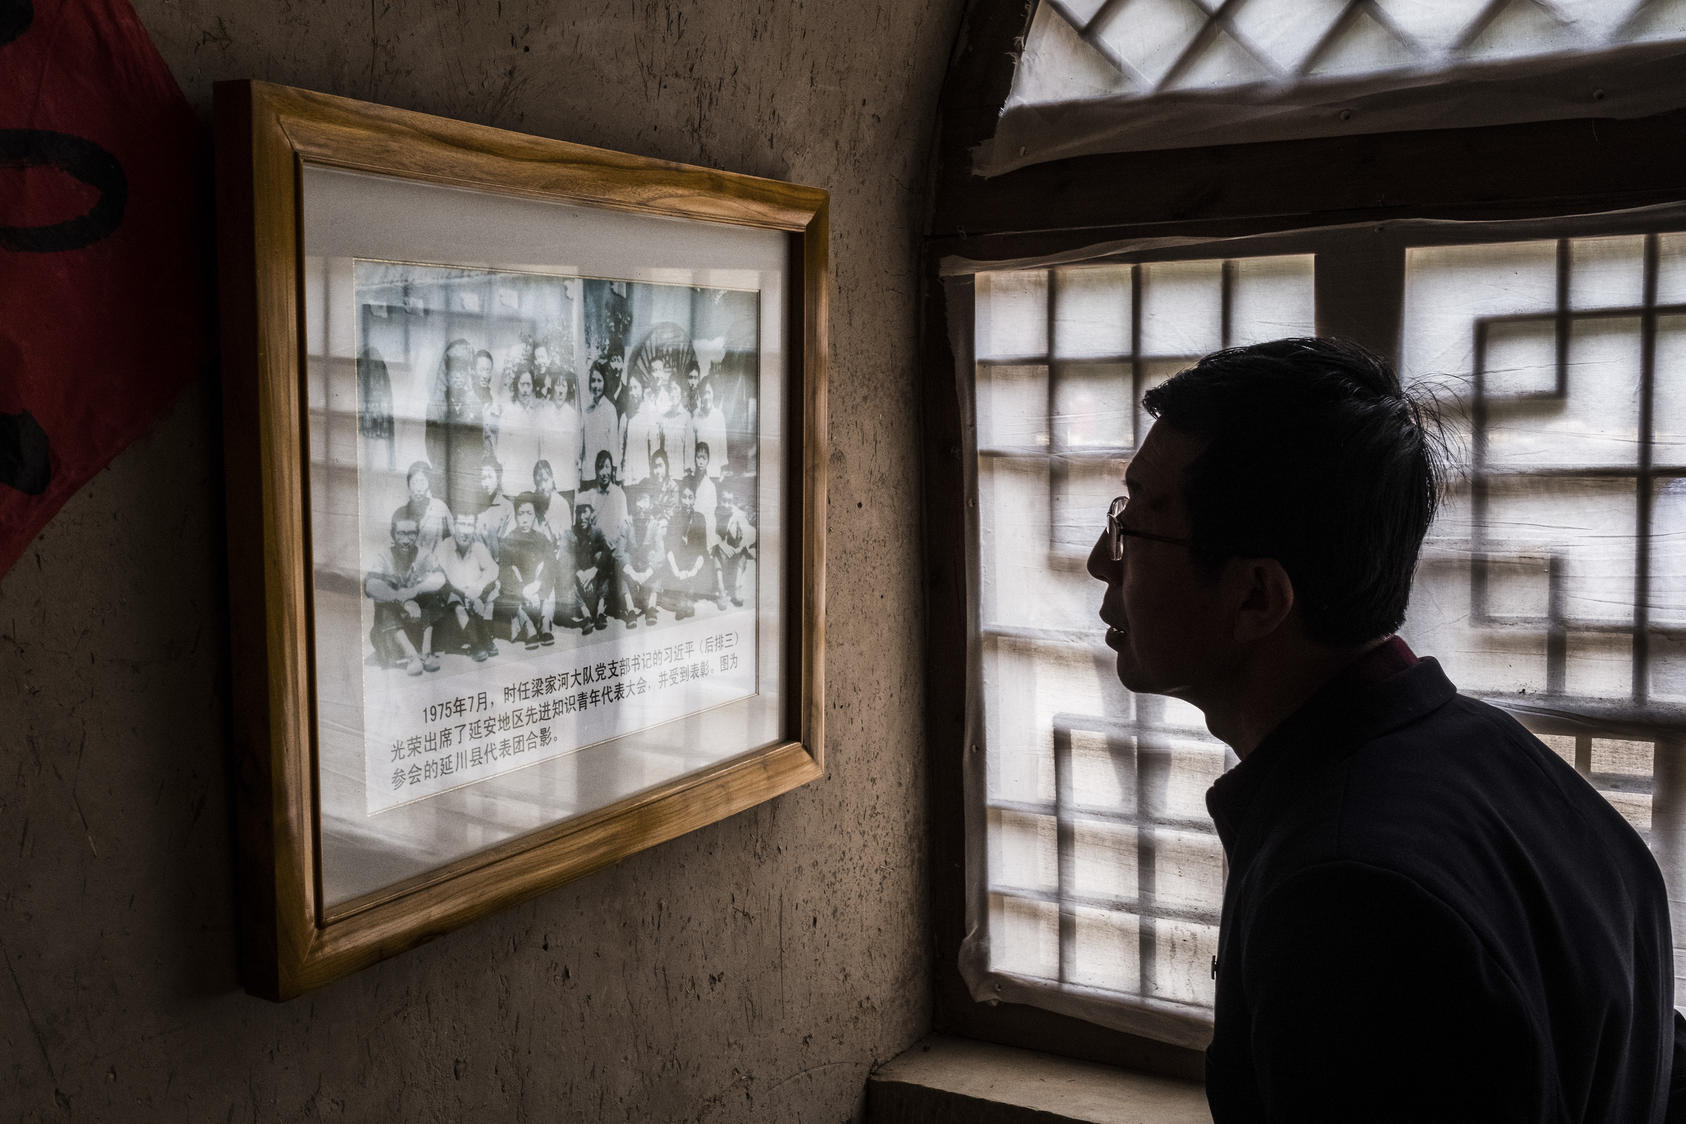 A visitor looks at a photo of a young Xi Jinping with party members, in Liangjiahe, China. The village, where Xi spent a formative period of his youth during the Cultural Revolution, has been converted into a tourist attraction. Photo NYT/Bryan Denton